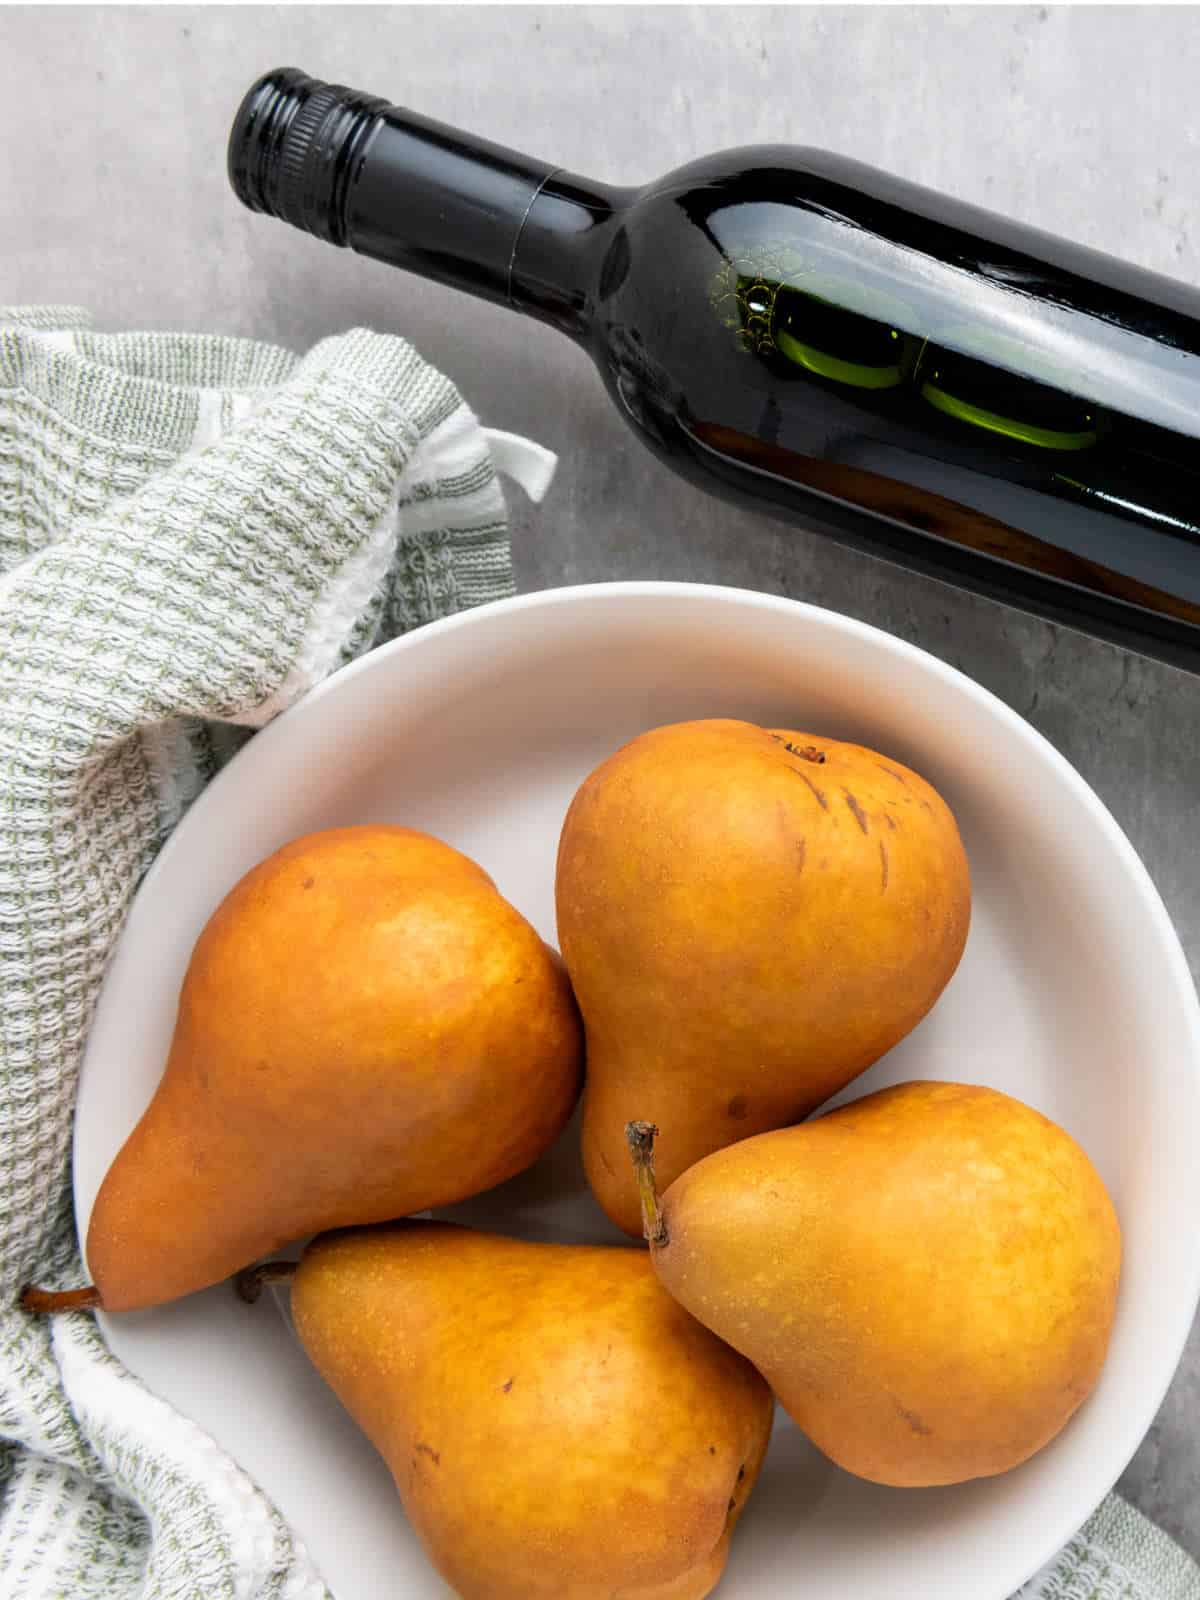 fresh golden pears in a bowl with a bottle of wine nearby.